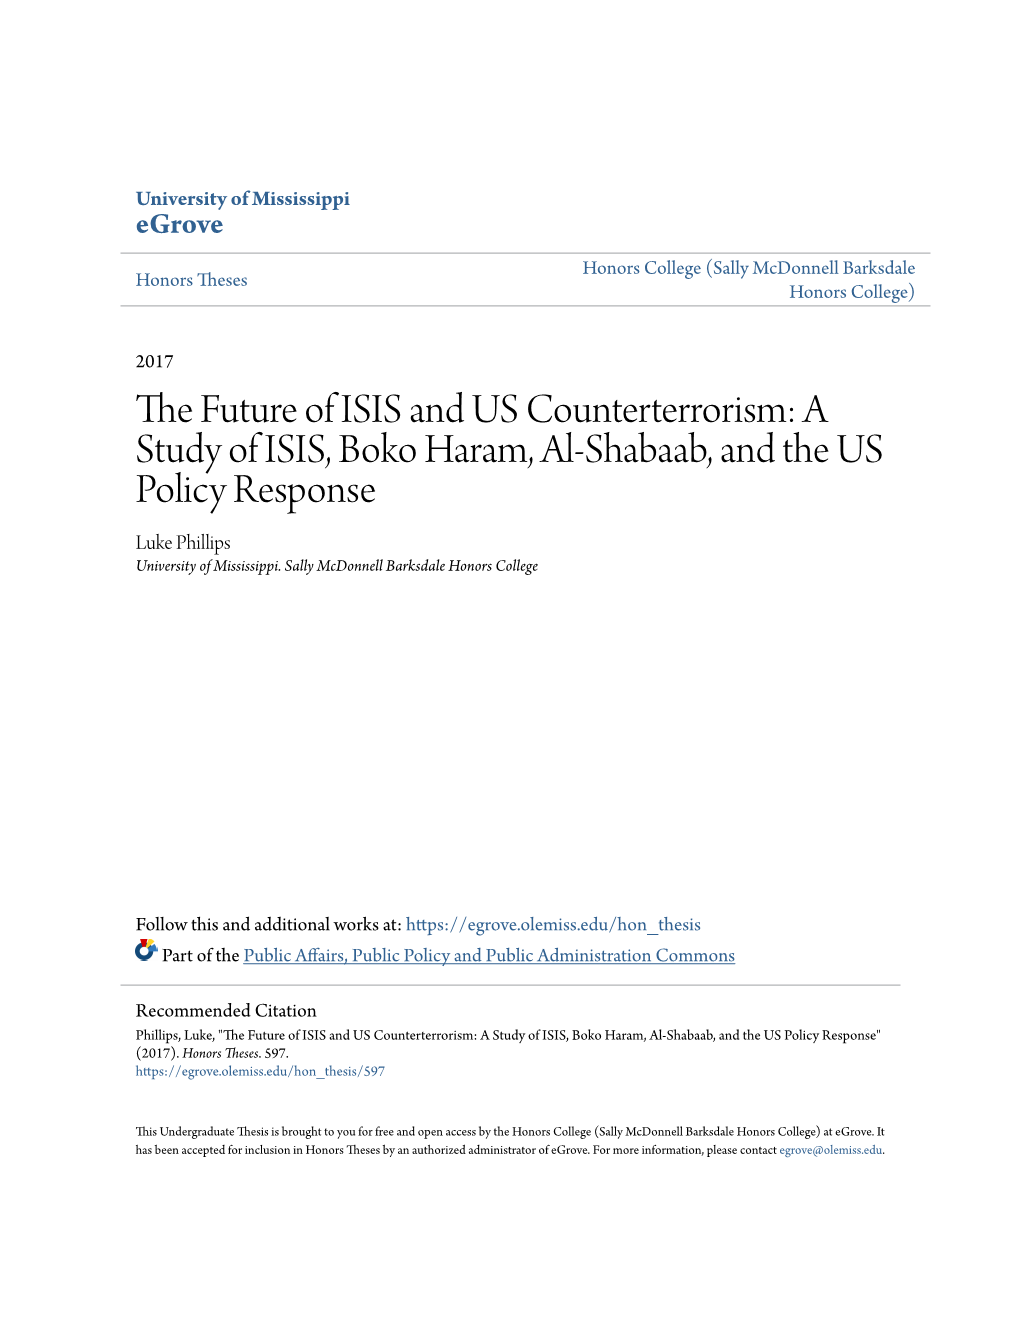 A Study of ISIS, Boko Haram, Al-Shabaab, and the US Policy Response Luke Phillips University of Mississippi